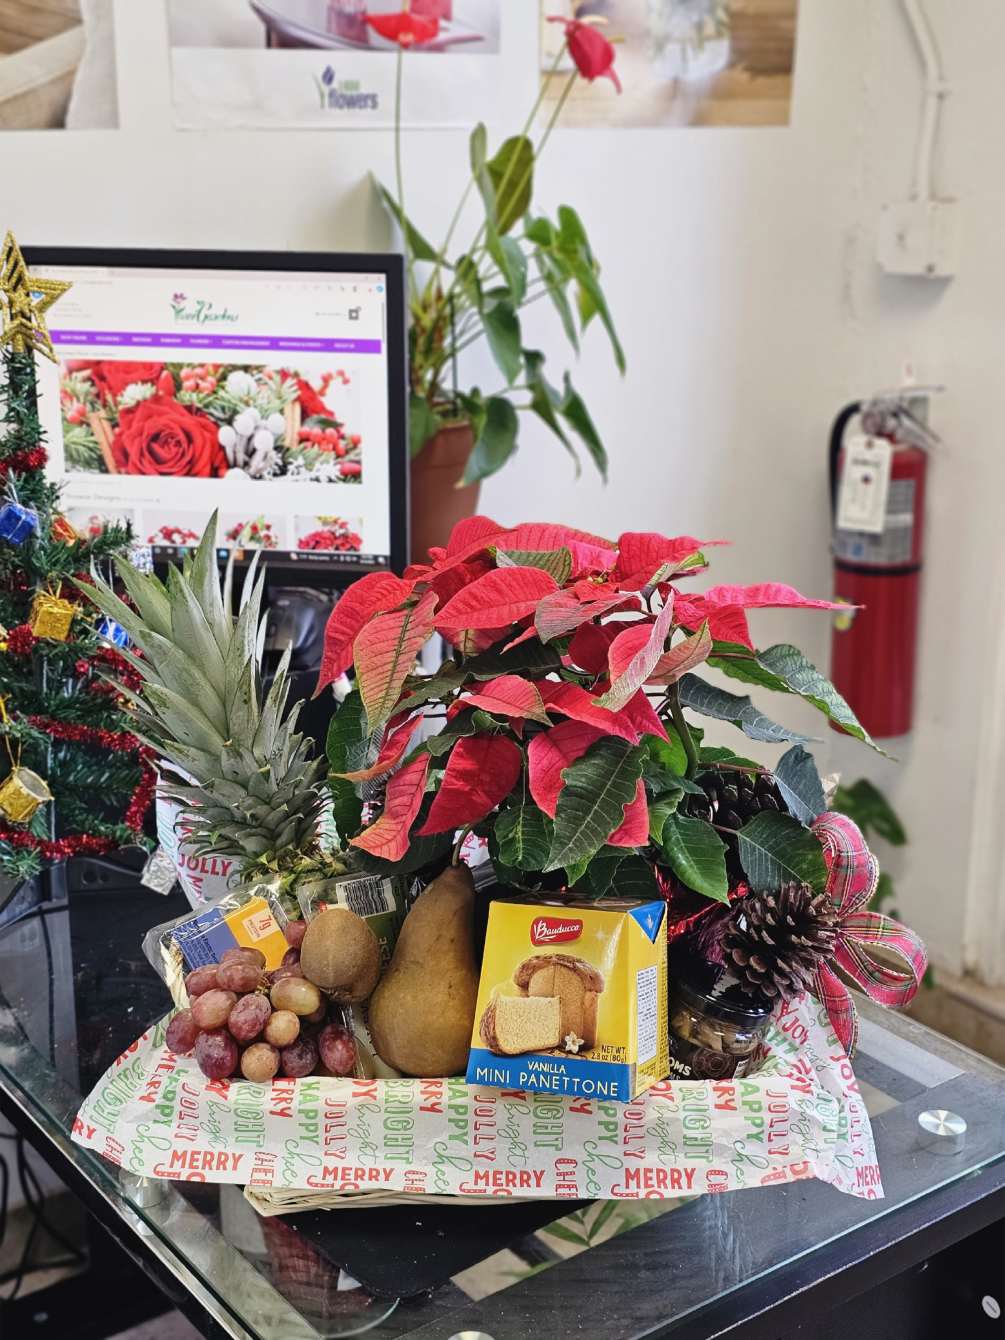 Gourmet fruit basket including a Christmas poinsettia plant and tropical fruits

Variety of